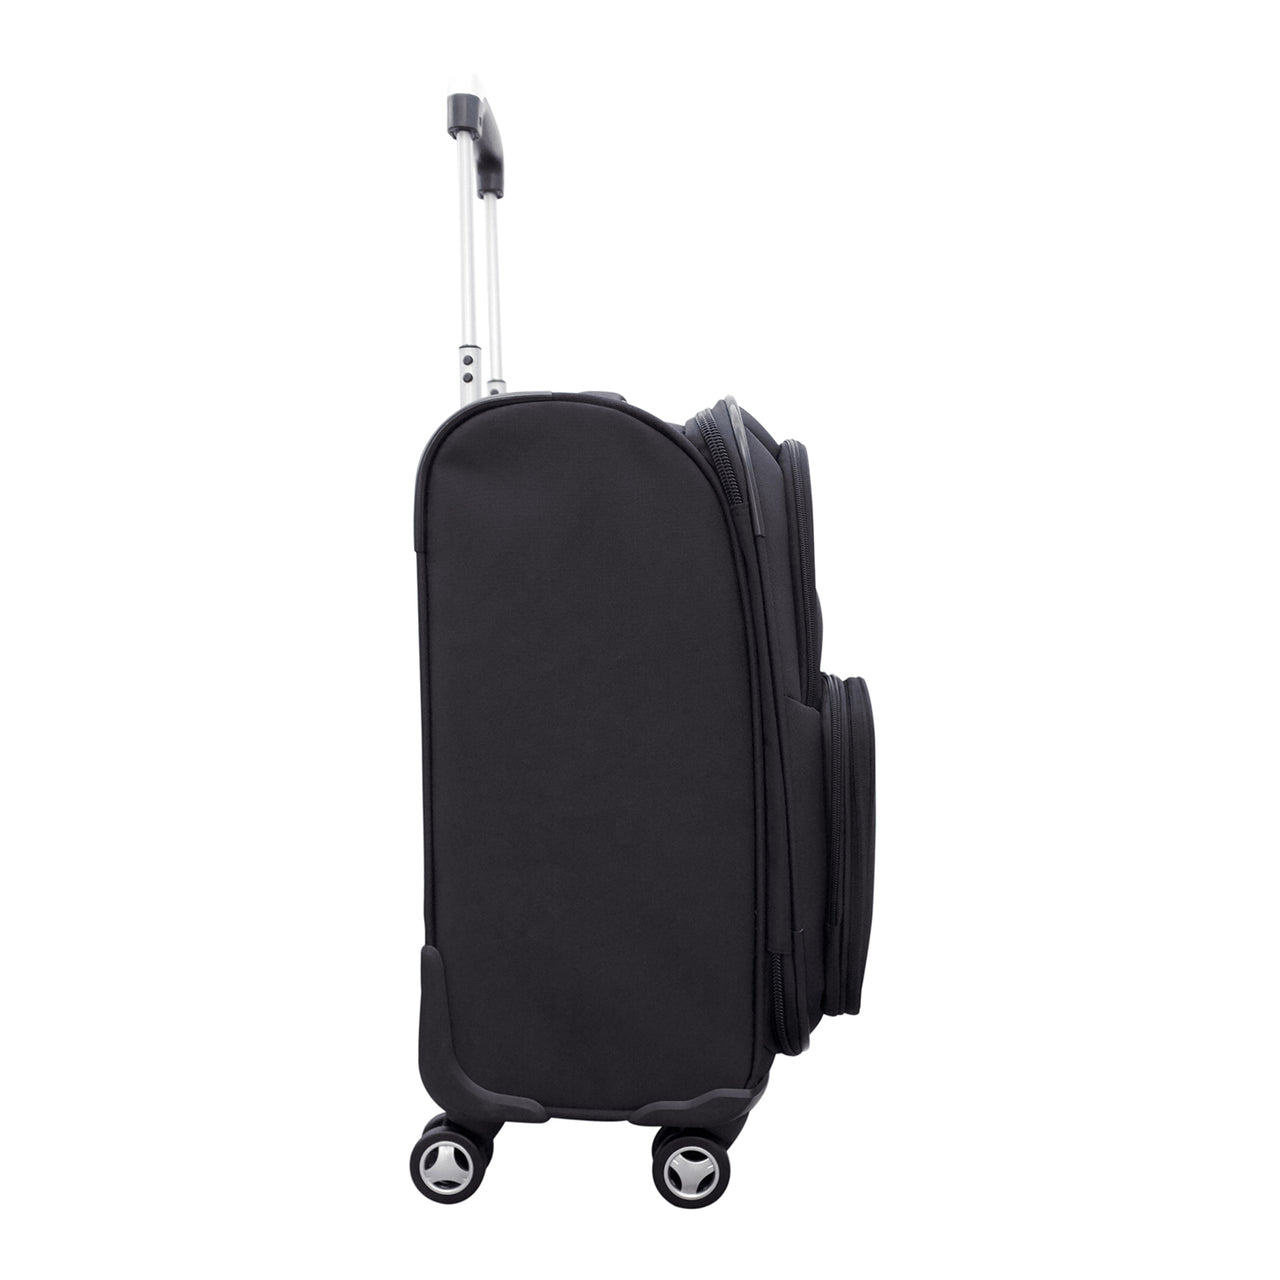 Appalachian State Mountaineers 20" Carry-on Spinner Luggage